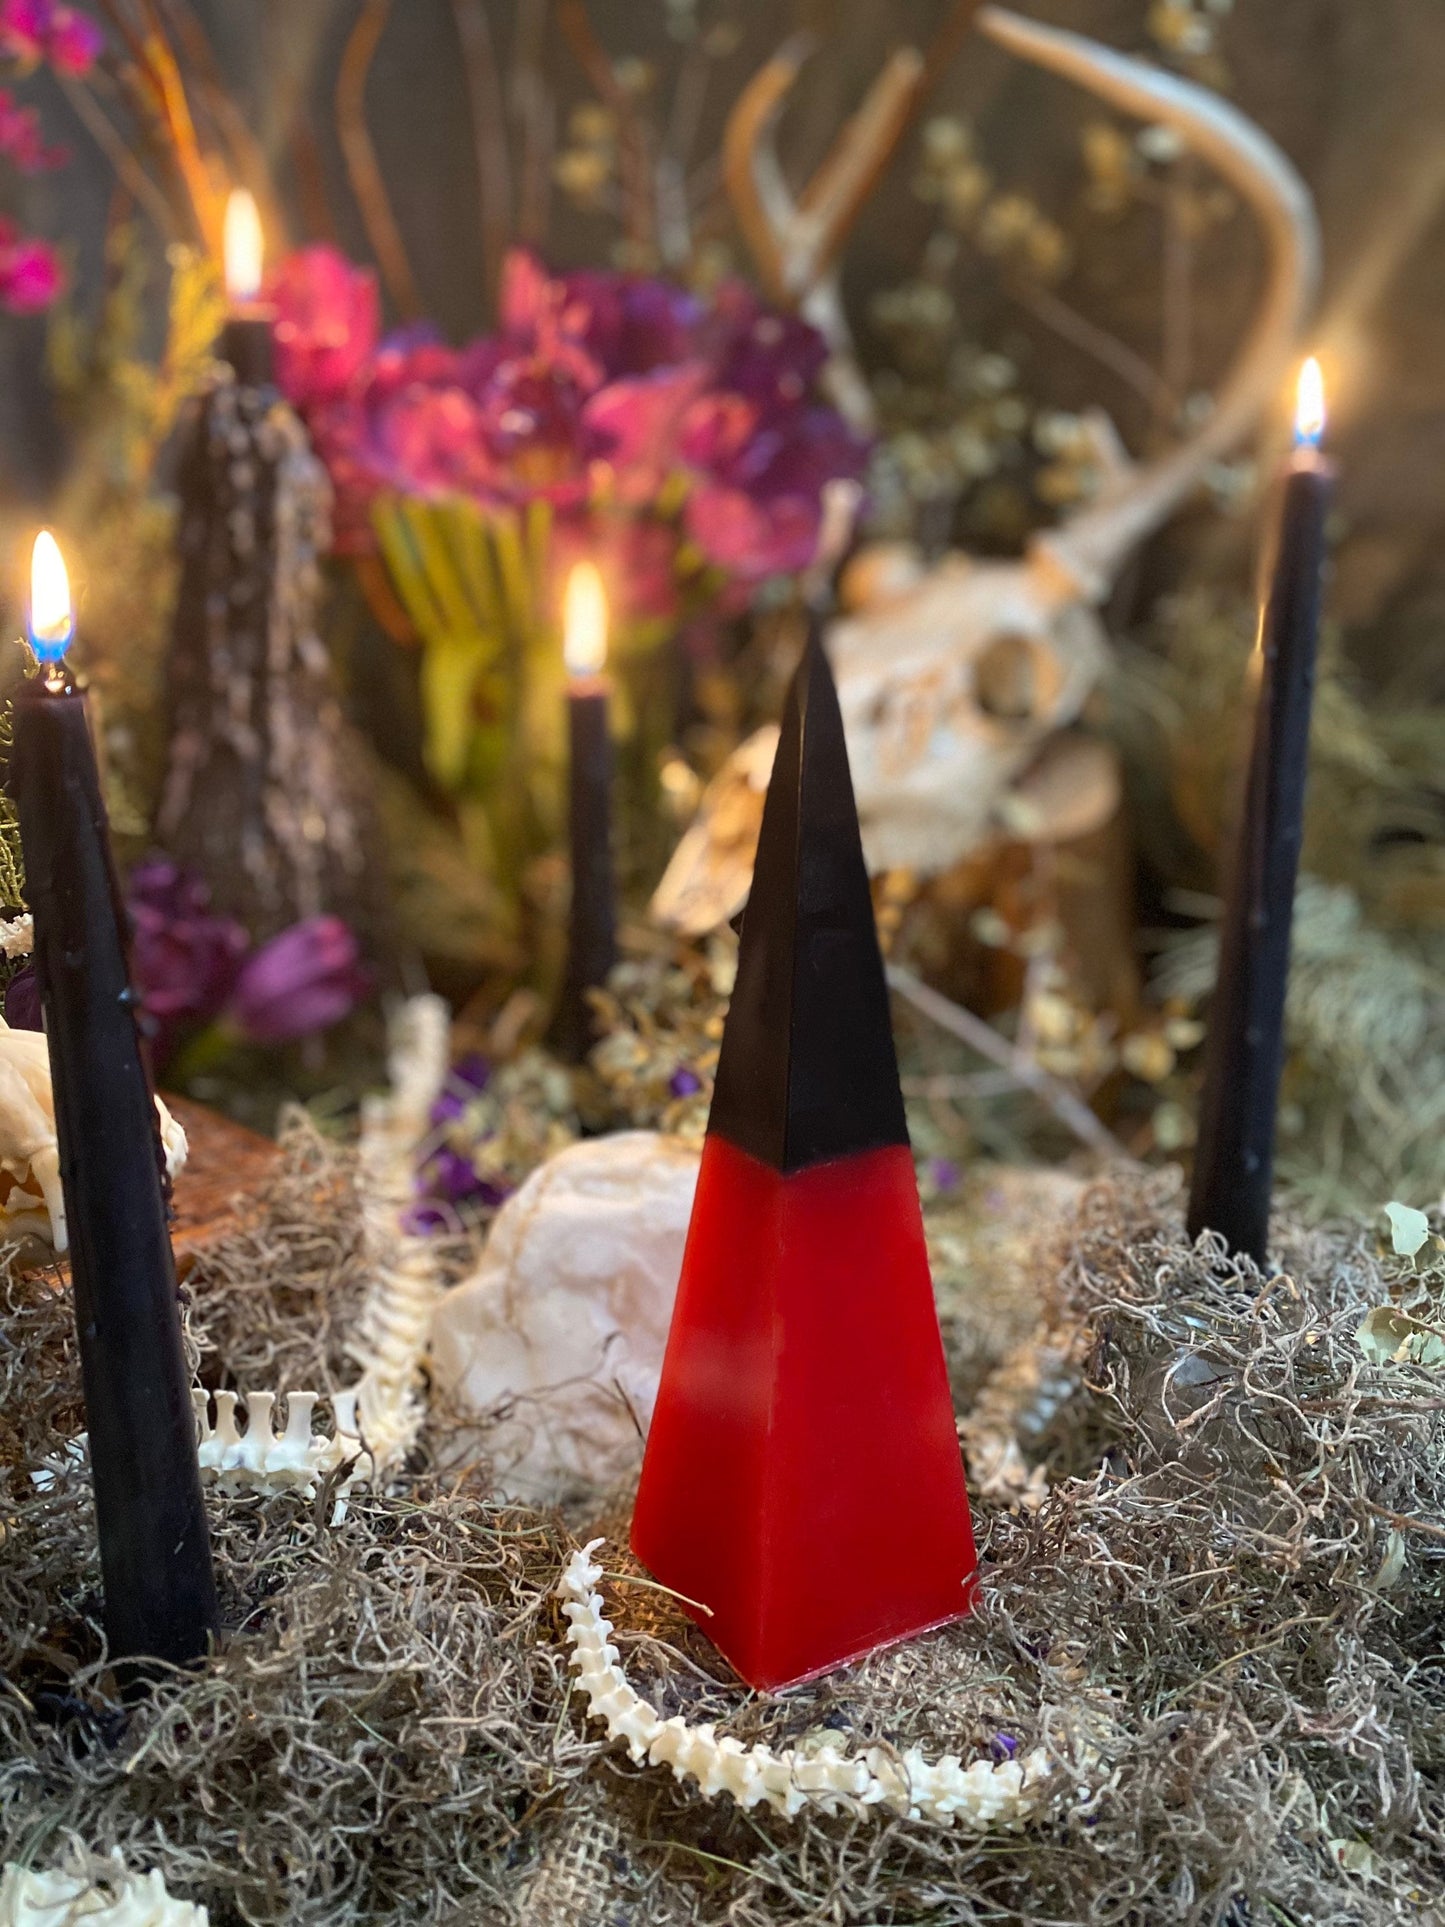 Reversing or Love Uncrossing Pyramid Figure Candle